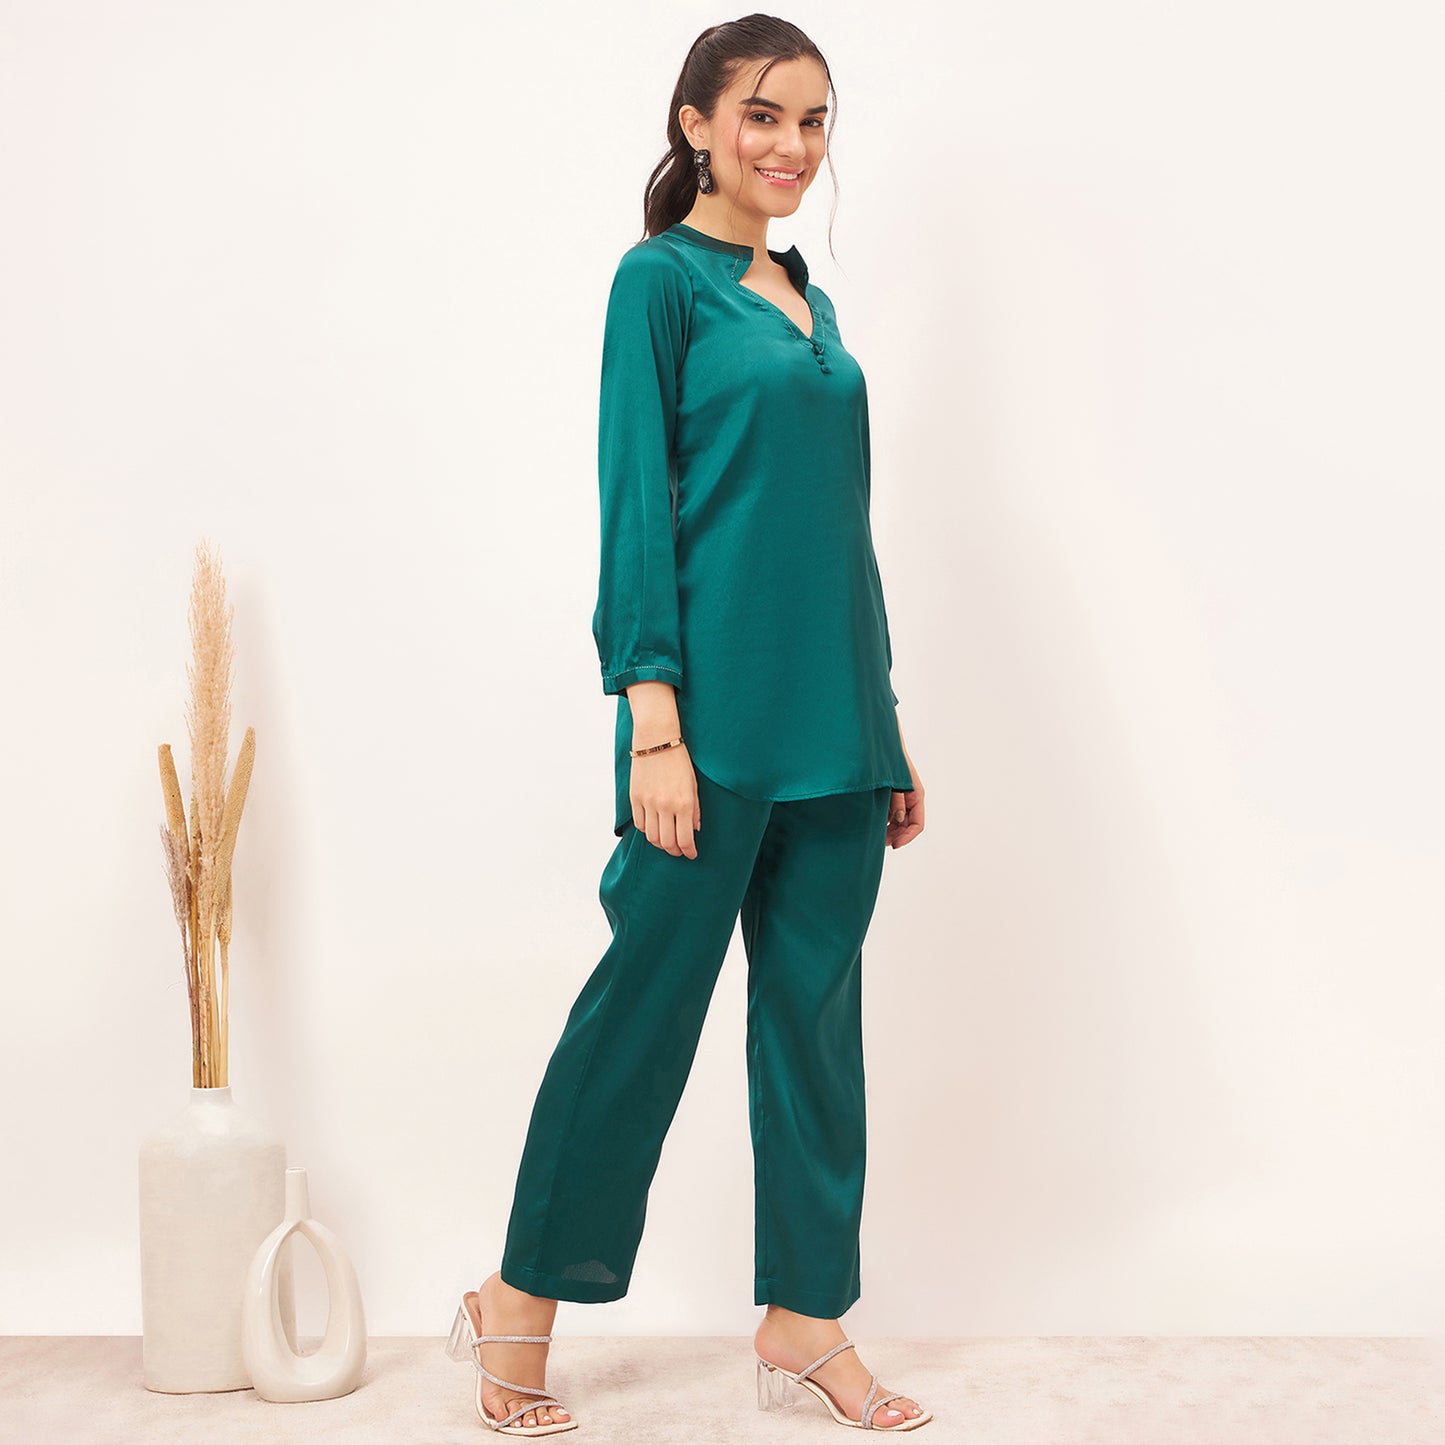 Teal Embellished Satin Top with Straight Pants